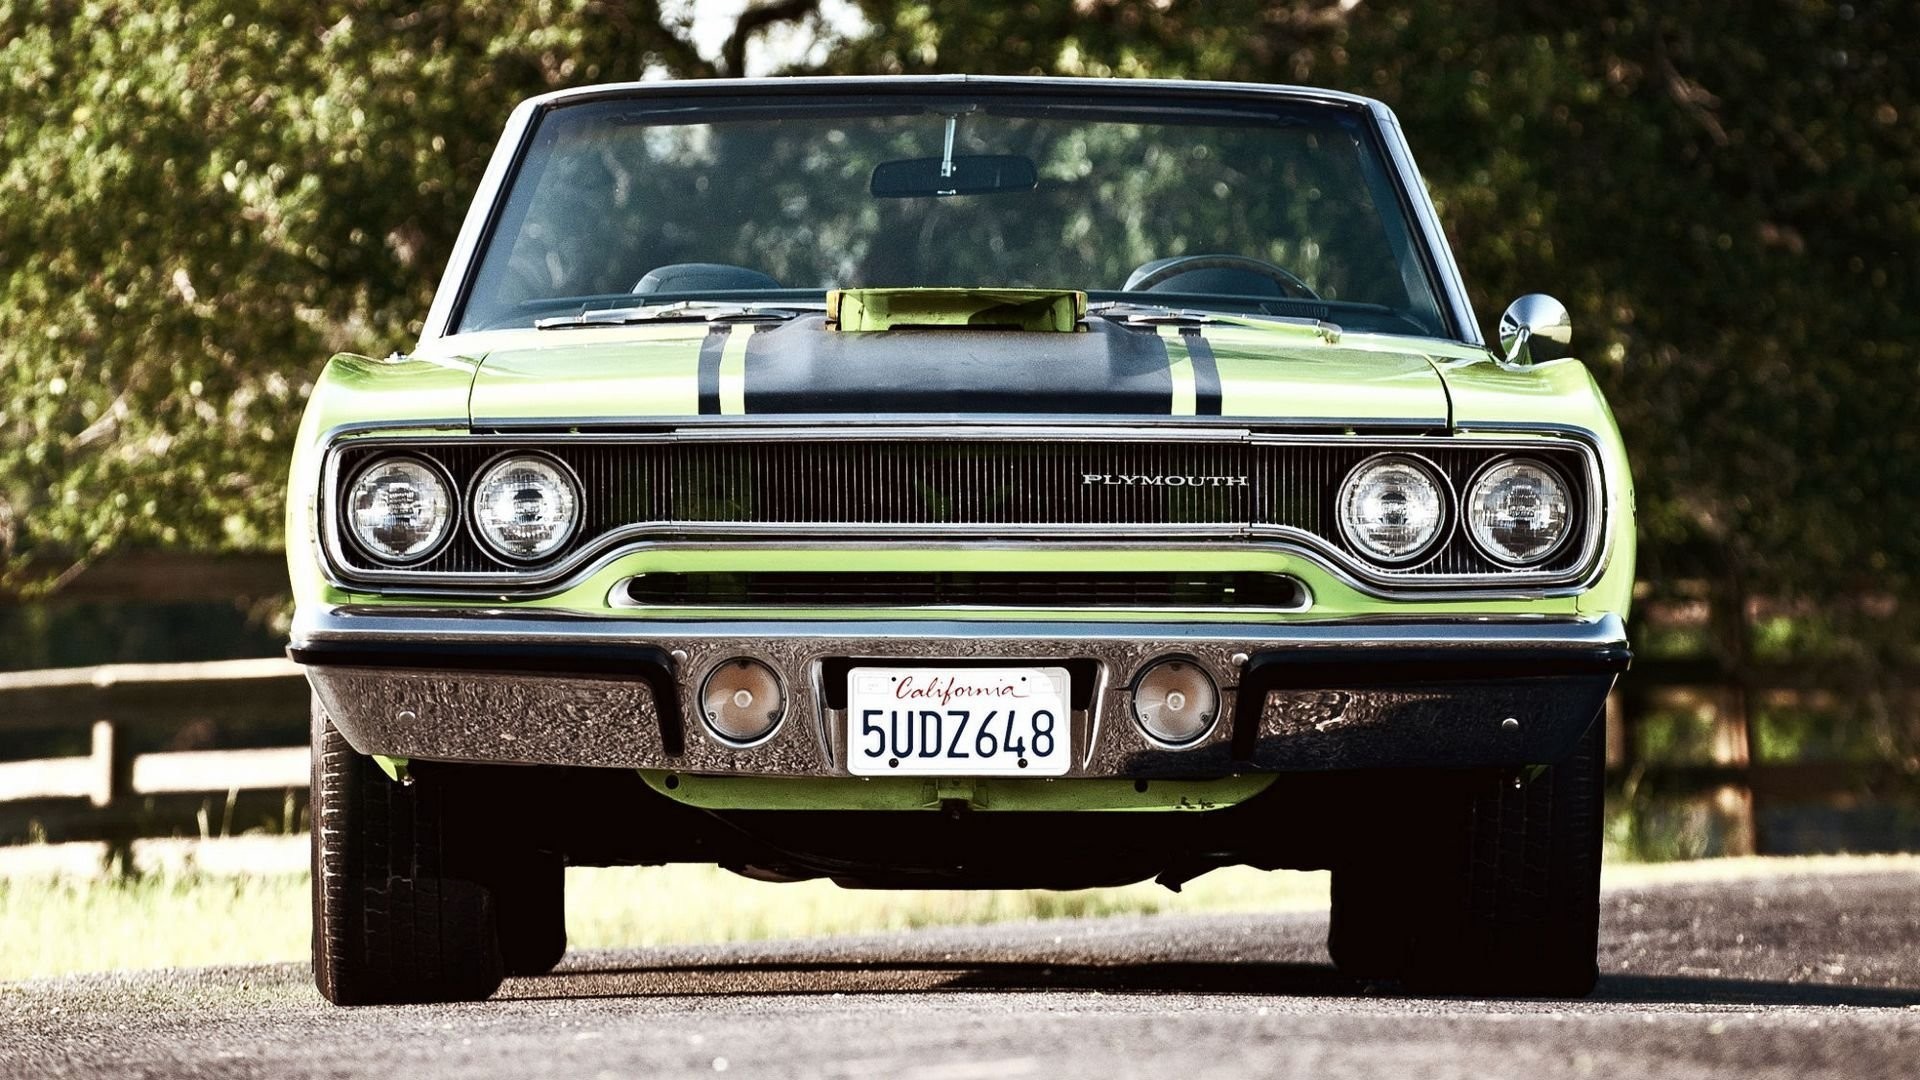 1920x1080 car wallpapers green plymouth road runner convertible muscle car beautiful  automobile vehicles machine front